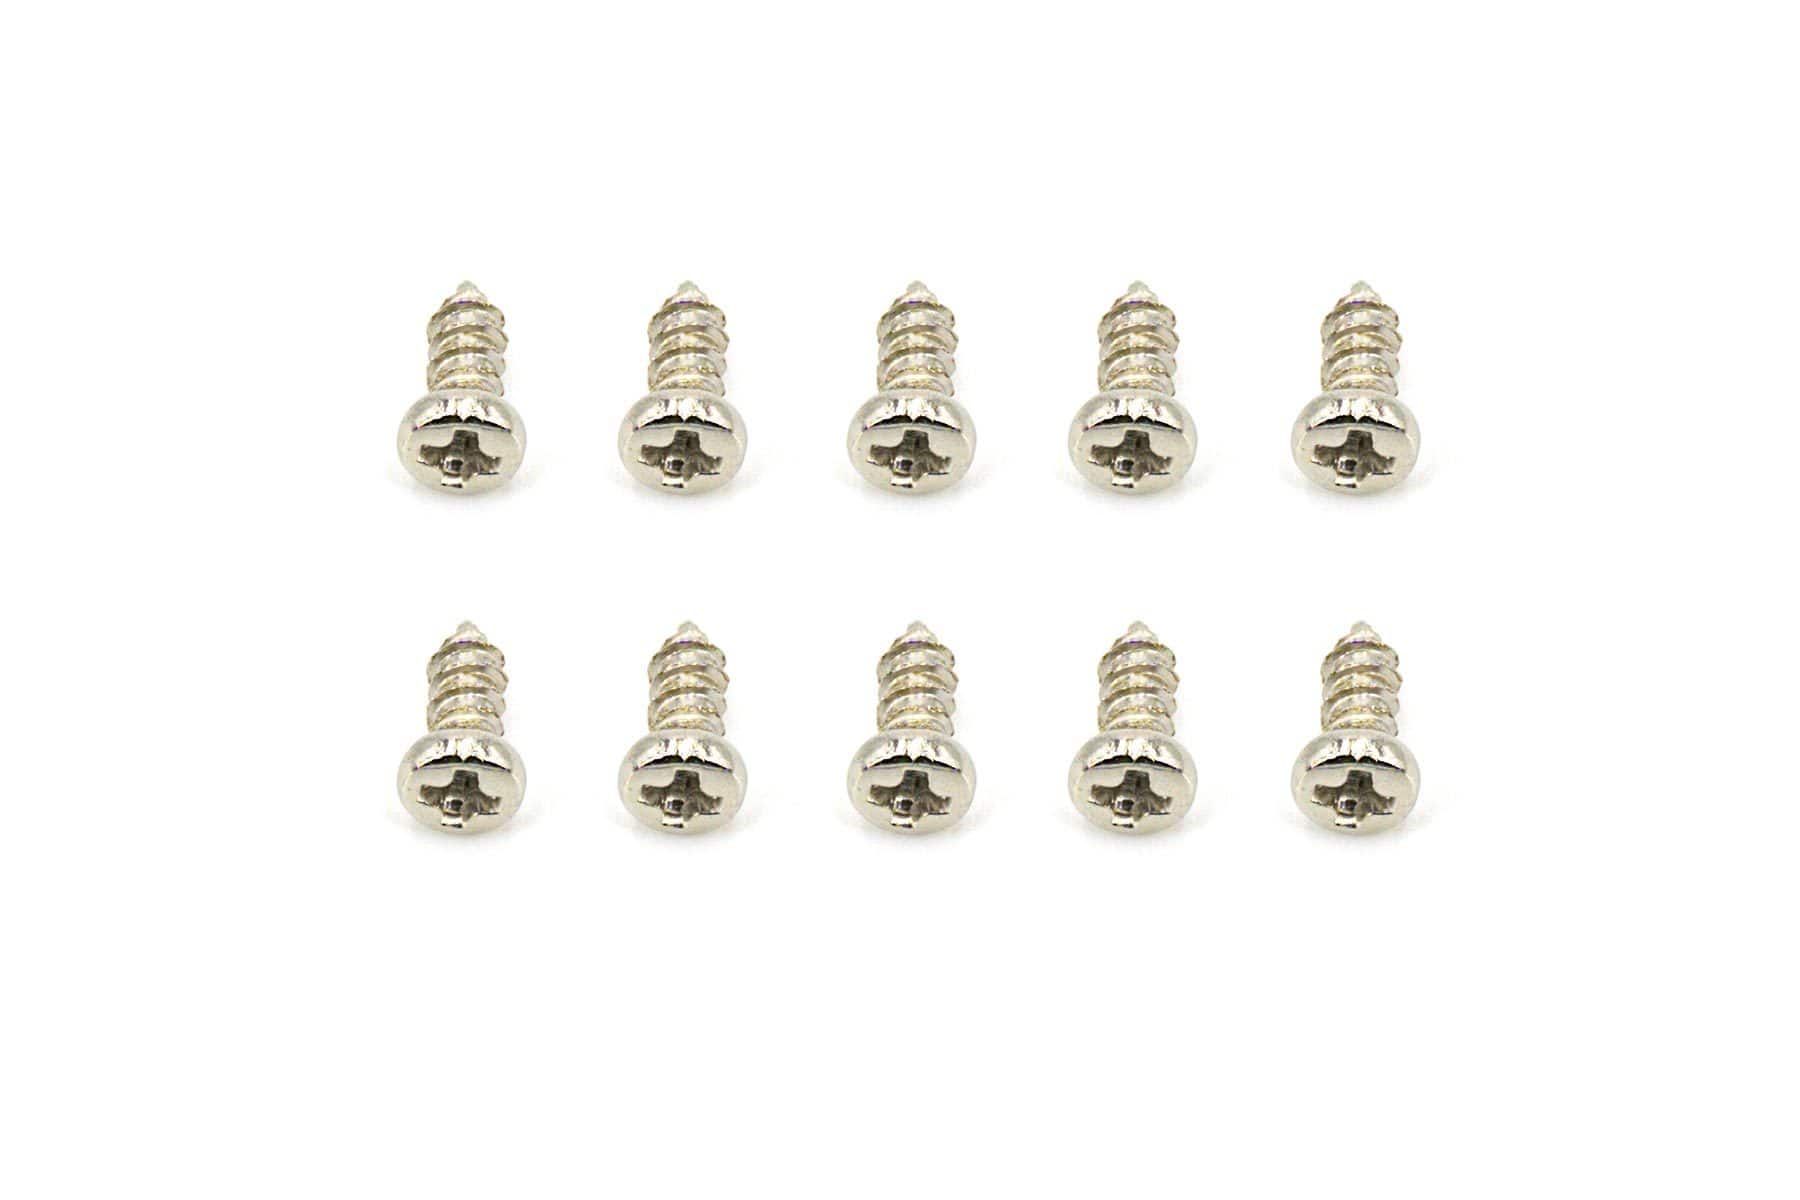 BenchCraft 2.5mm x 6mm Self-Tapping Screws (10 Pack)